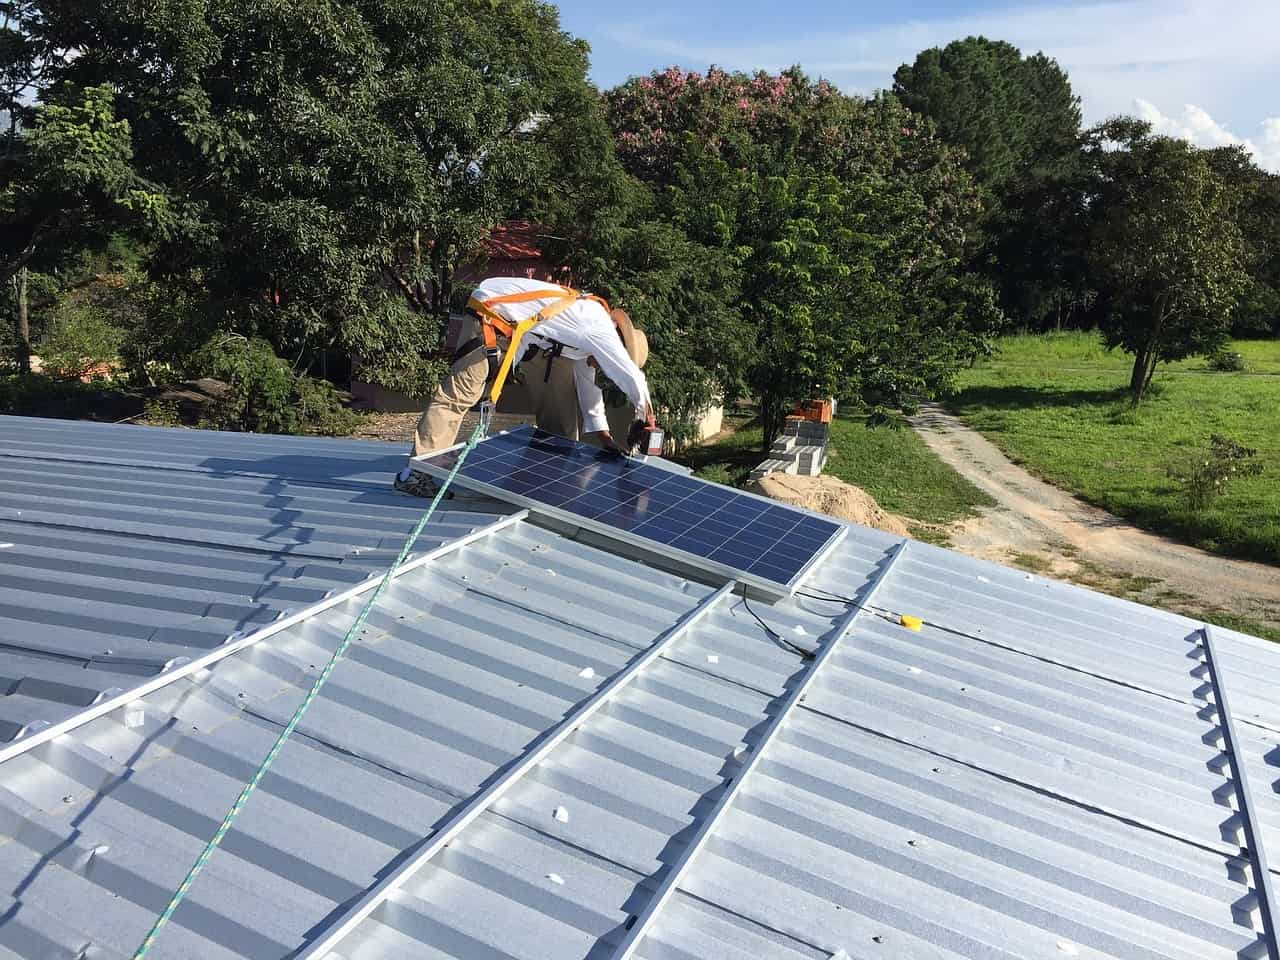 Installing solar panels – step by step